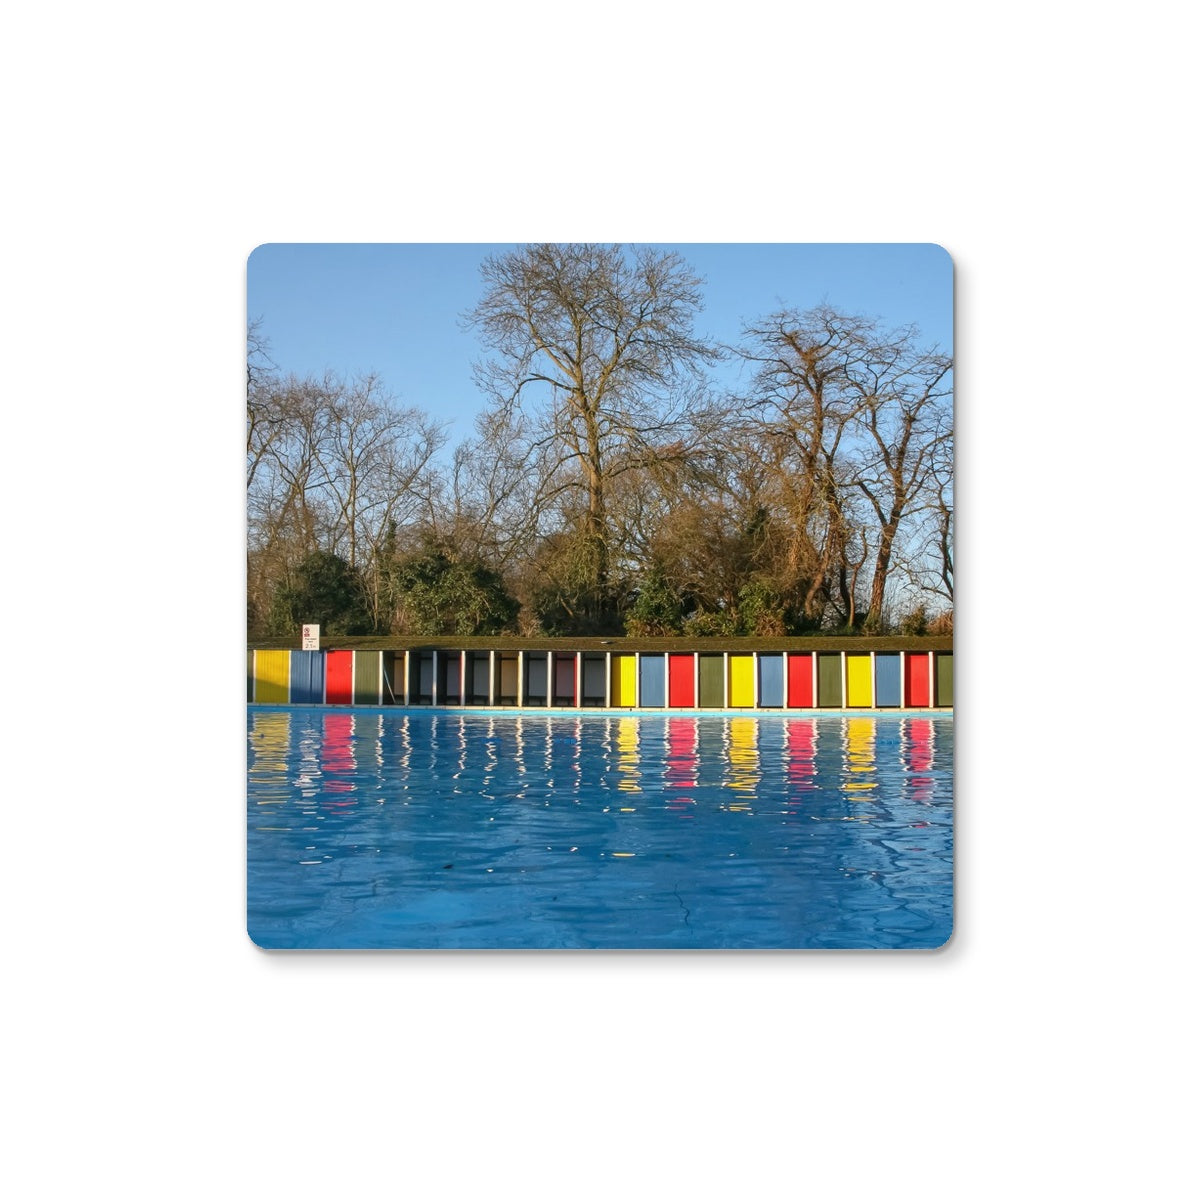 TOOTING BEC LIDO WITH TREES Coaster - Amy Adams Photography